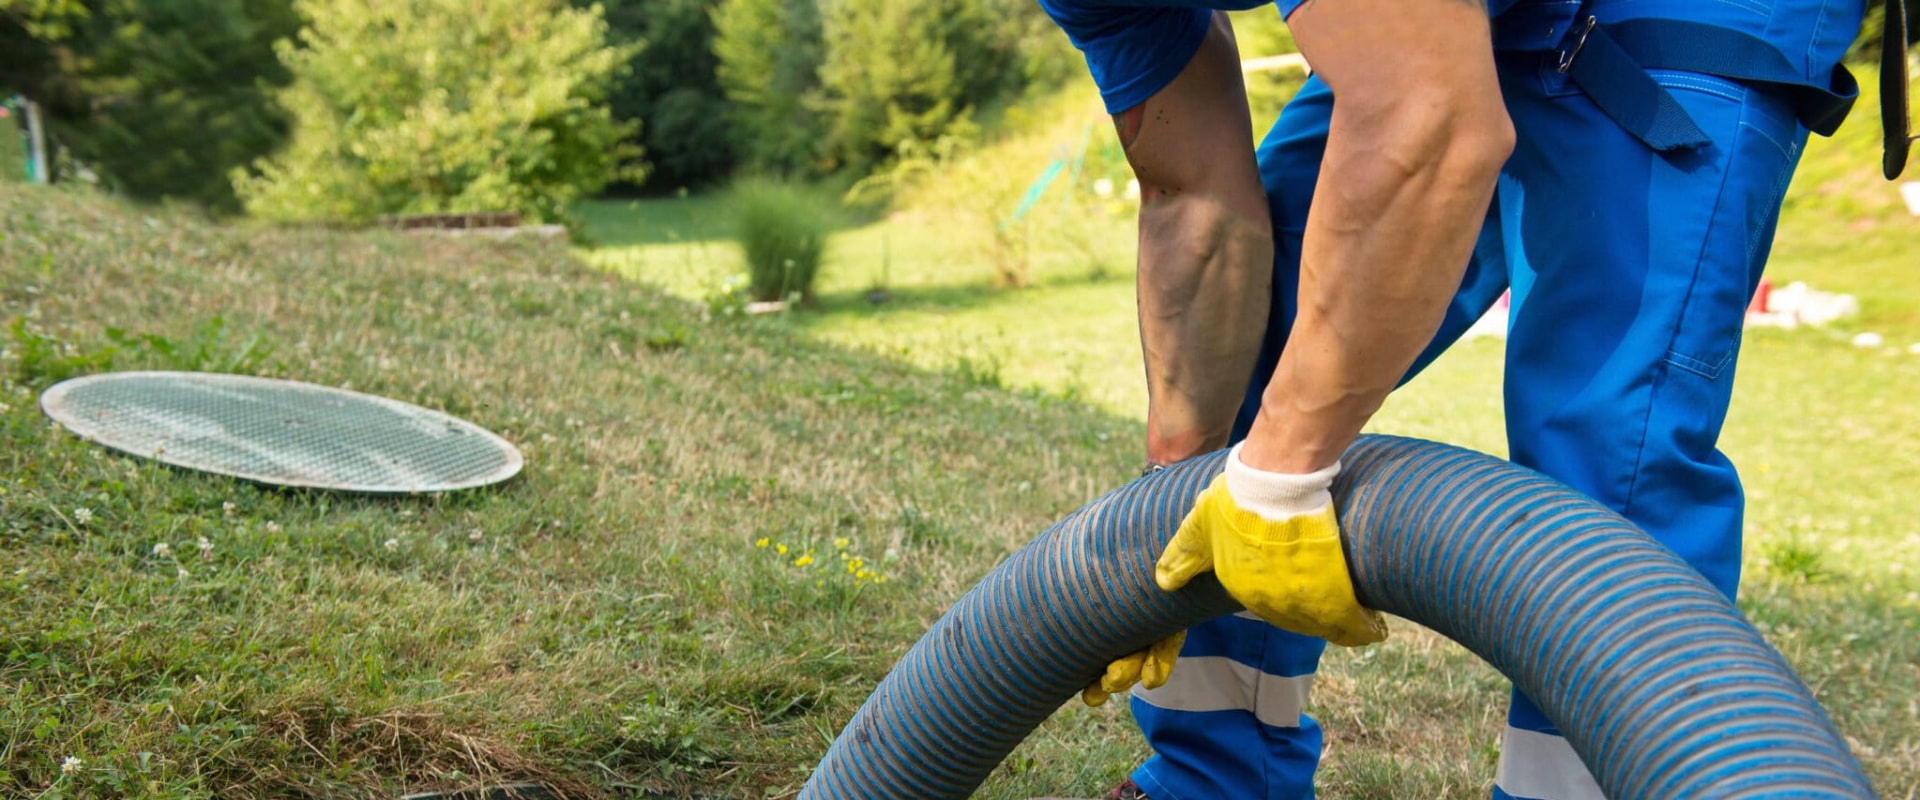 Sewer Line Repairs: Tips and Advice for Home Maintenance and Improvements